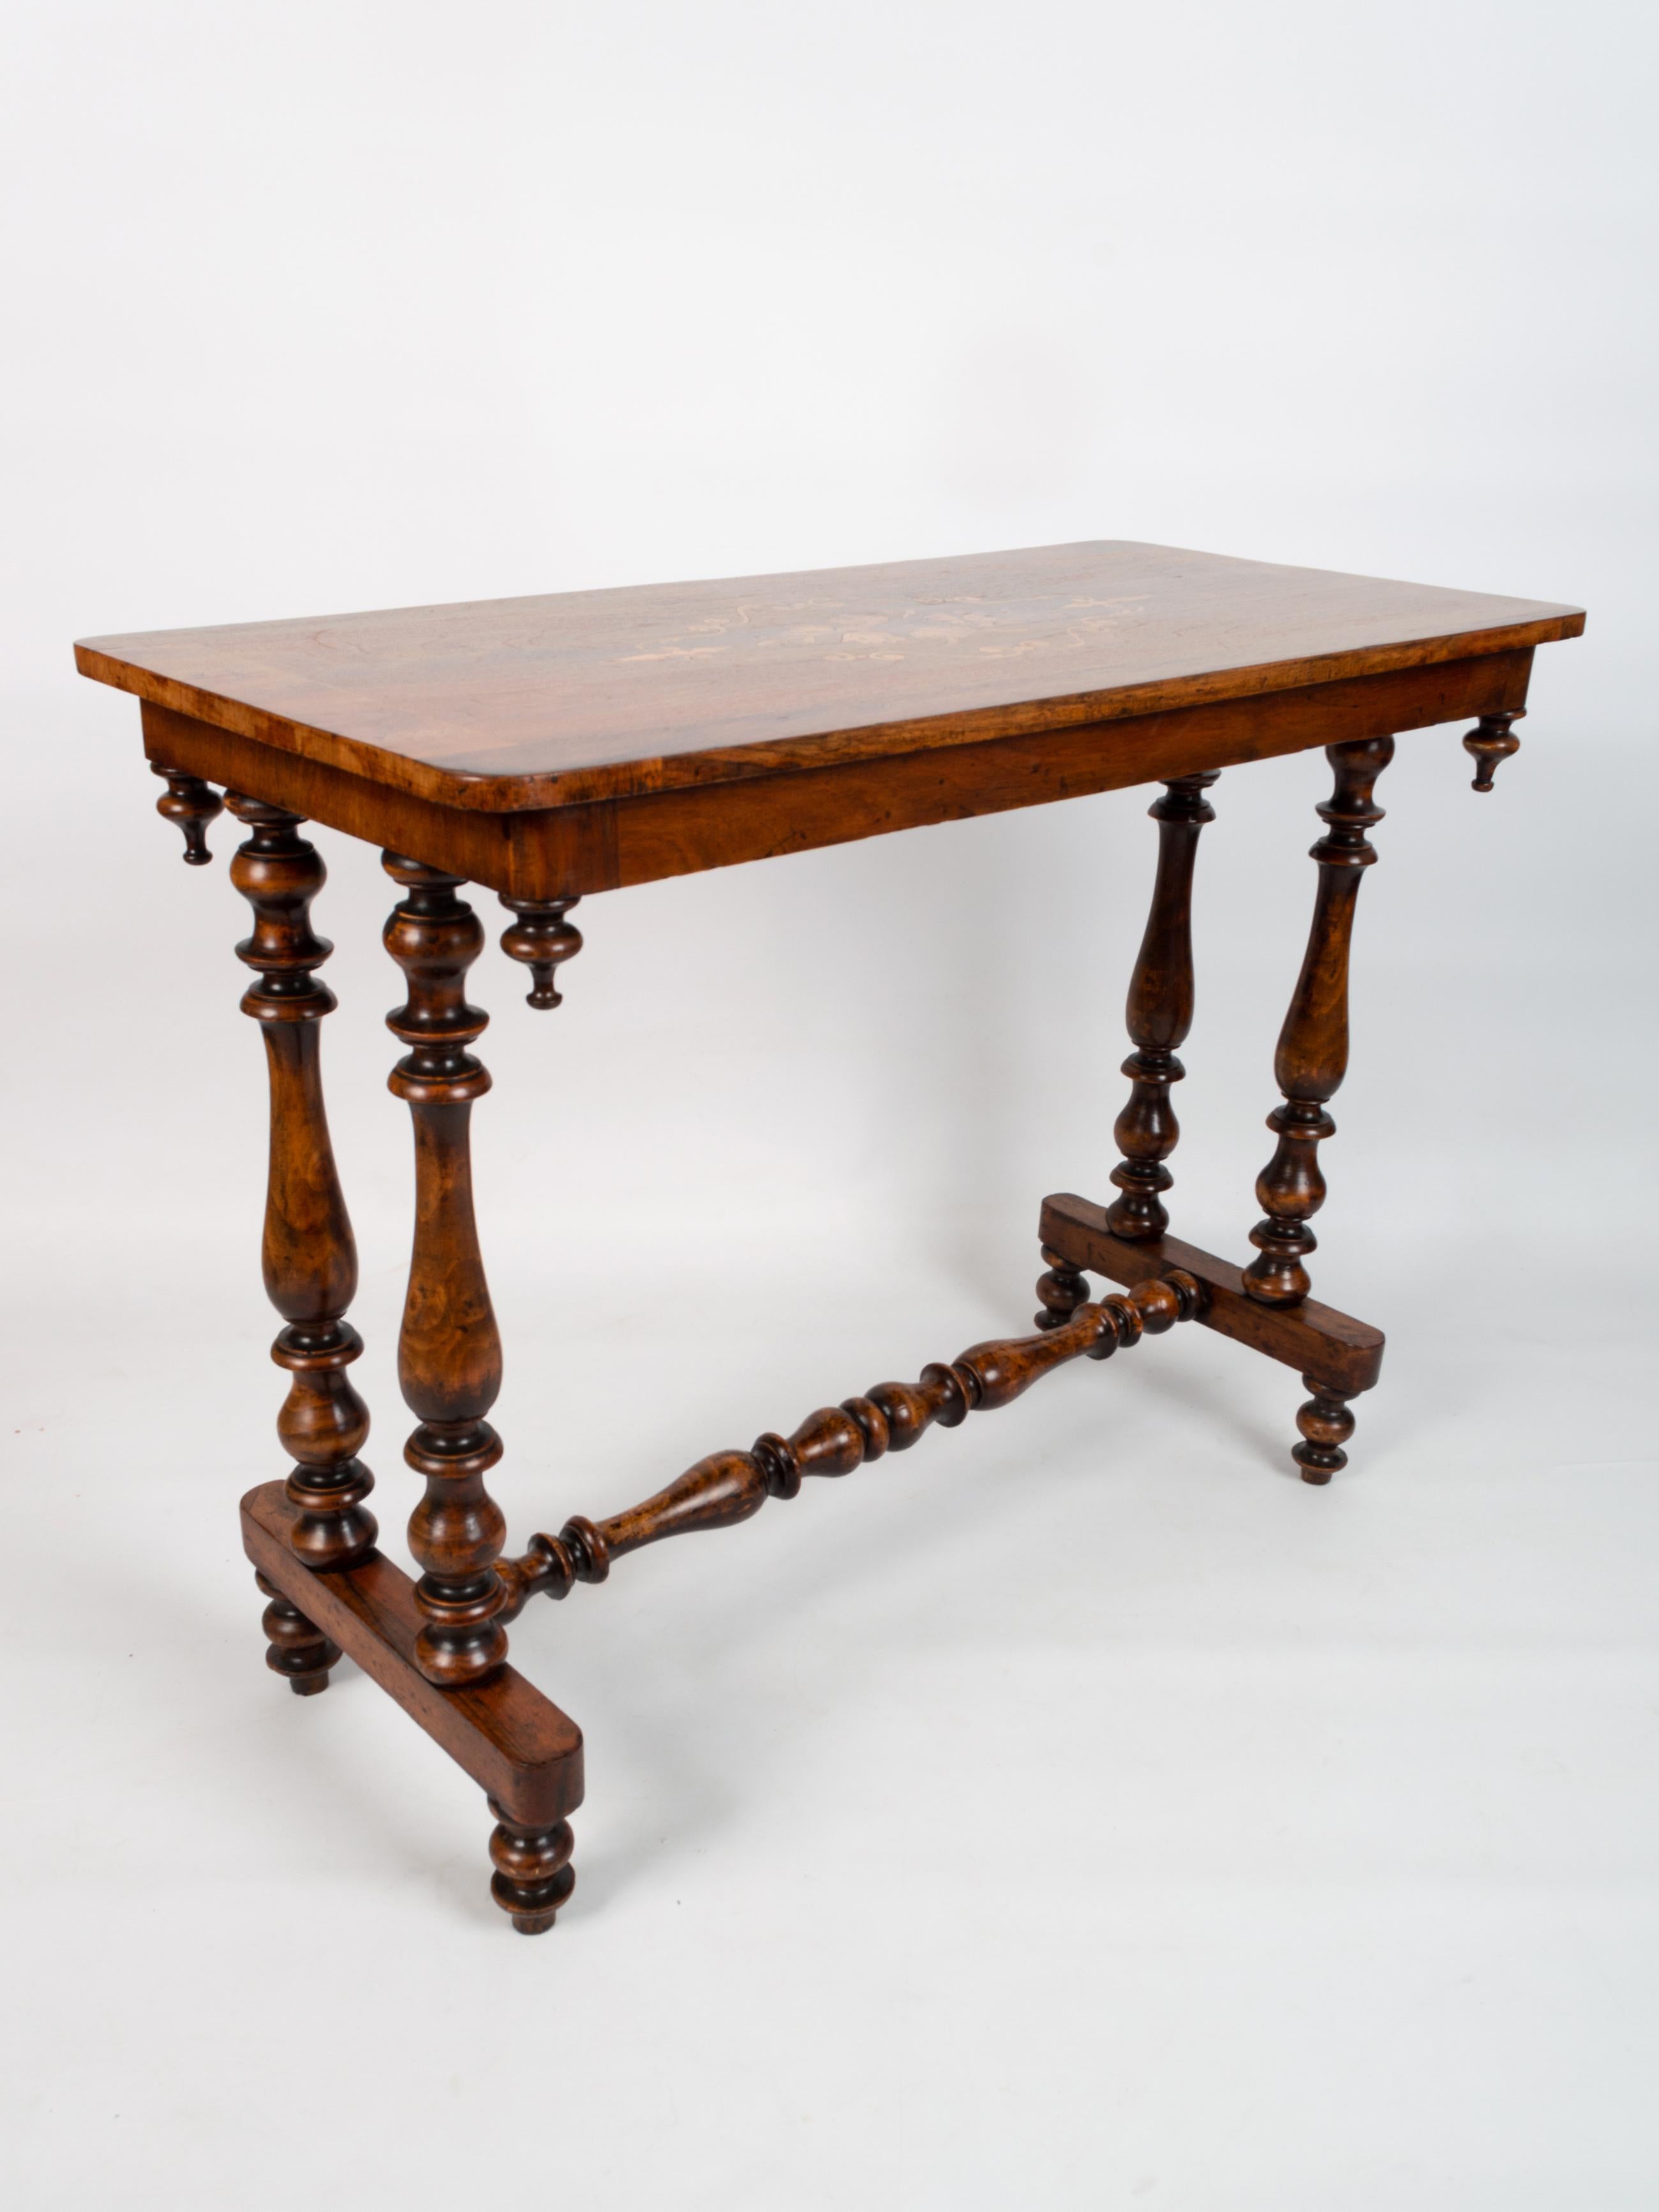 Antique English Edwardian Inlaid Walnut Hall Table Console C.1900 For Sale 3